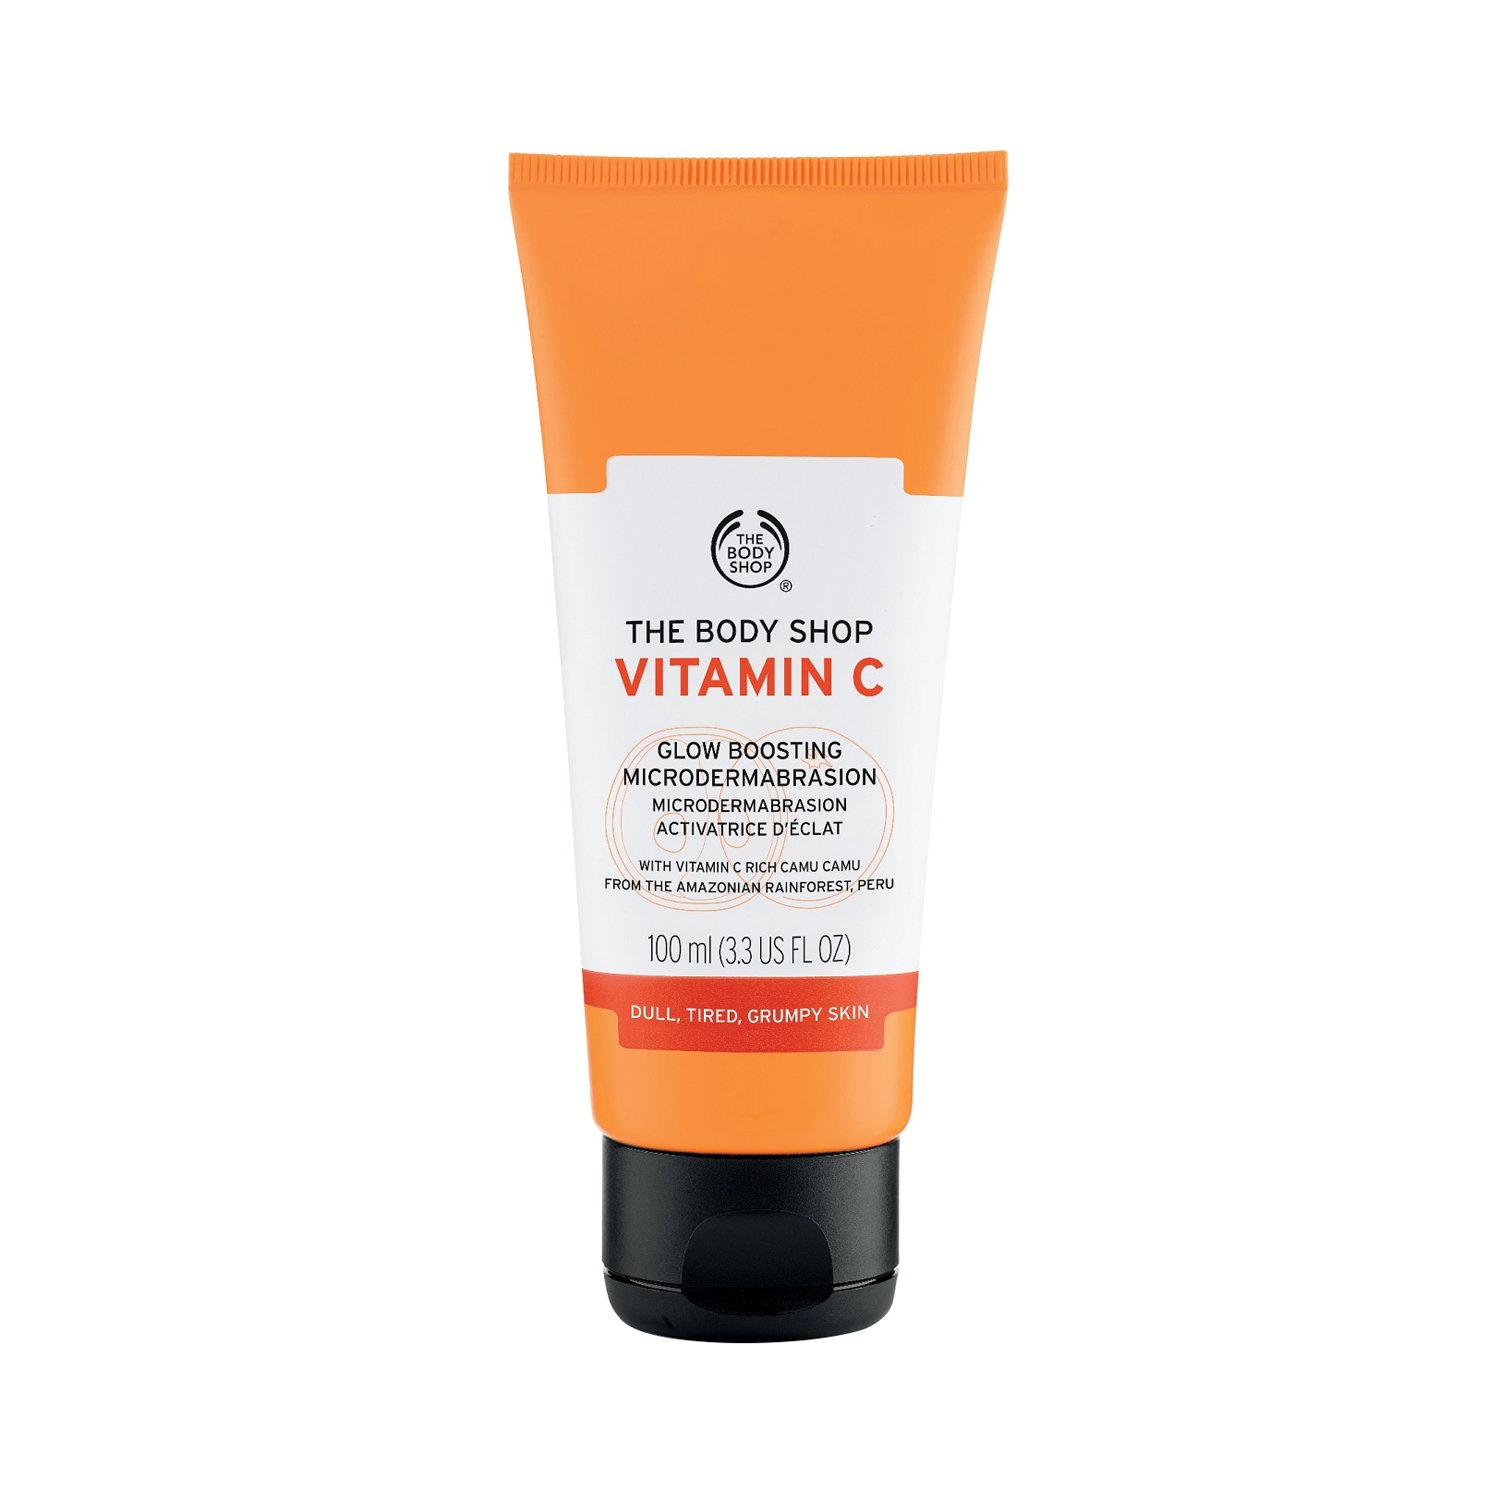 The Body Shop | The Body Shop Vitamin C Microdermabrasion (100 ml)